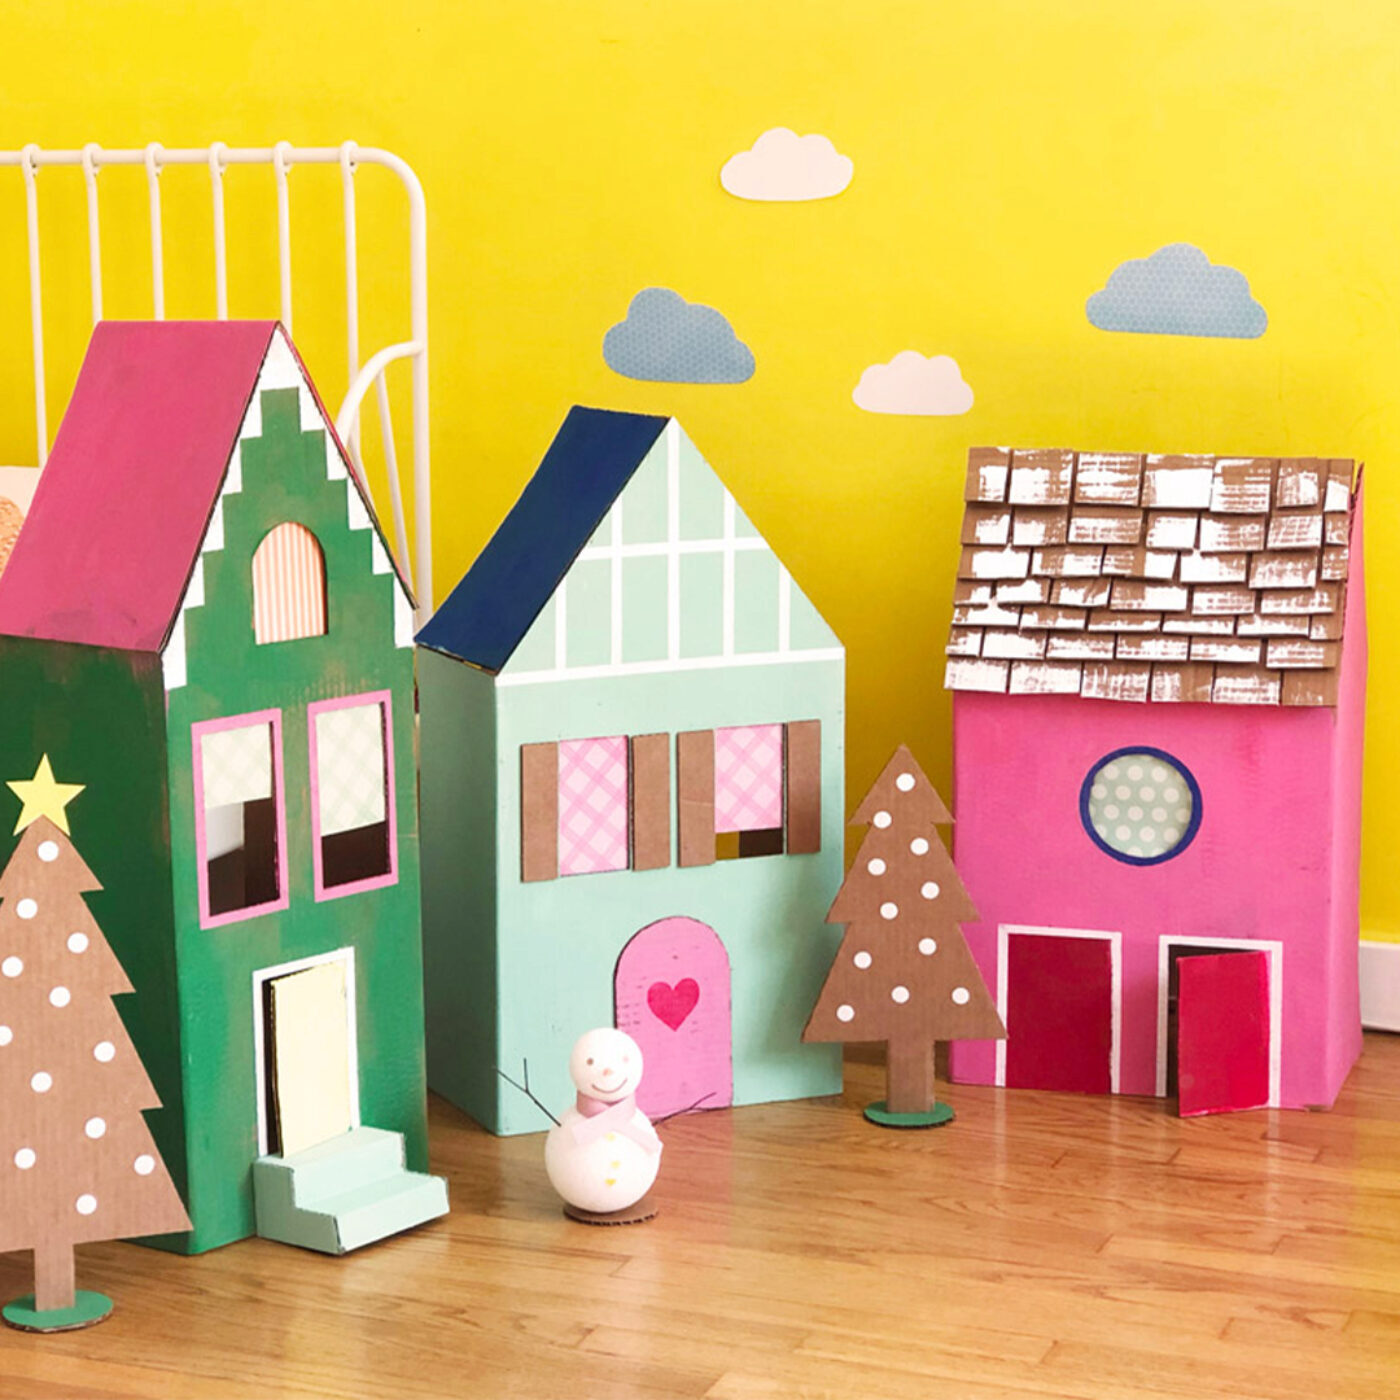 a village made of colorful painted cardboard box houses